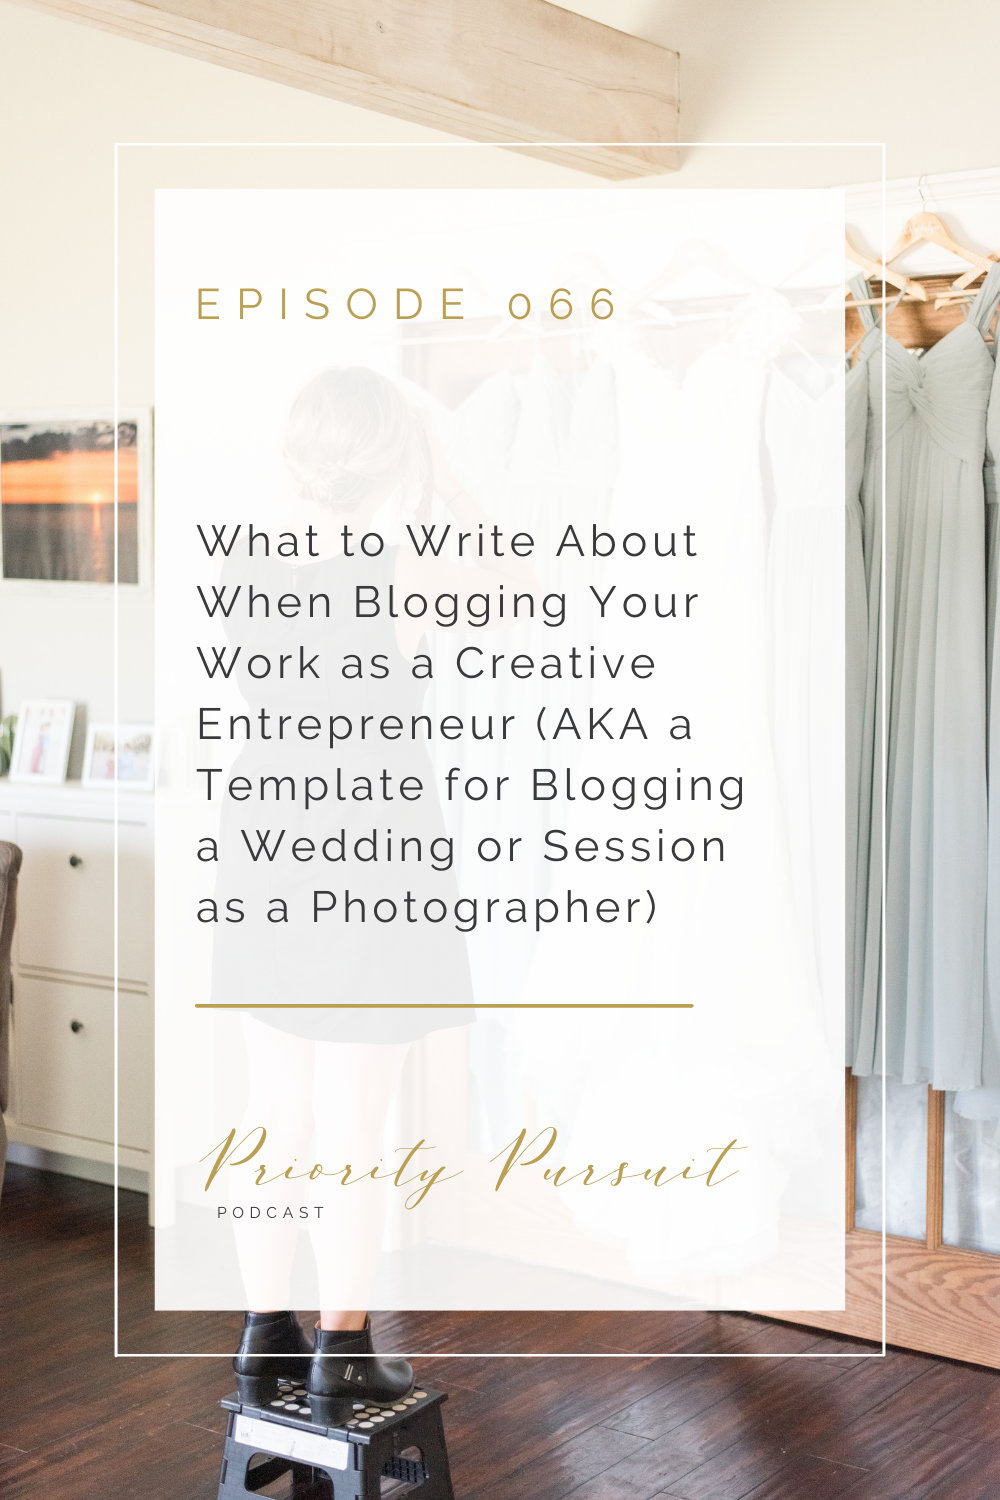 Victoria Rayburn explains what to write about when blogging your work as a creative entrepreneur (AKA in this episode of “Priority Pursuit.” 